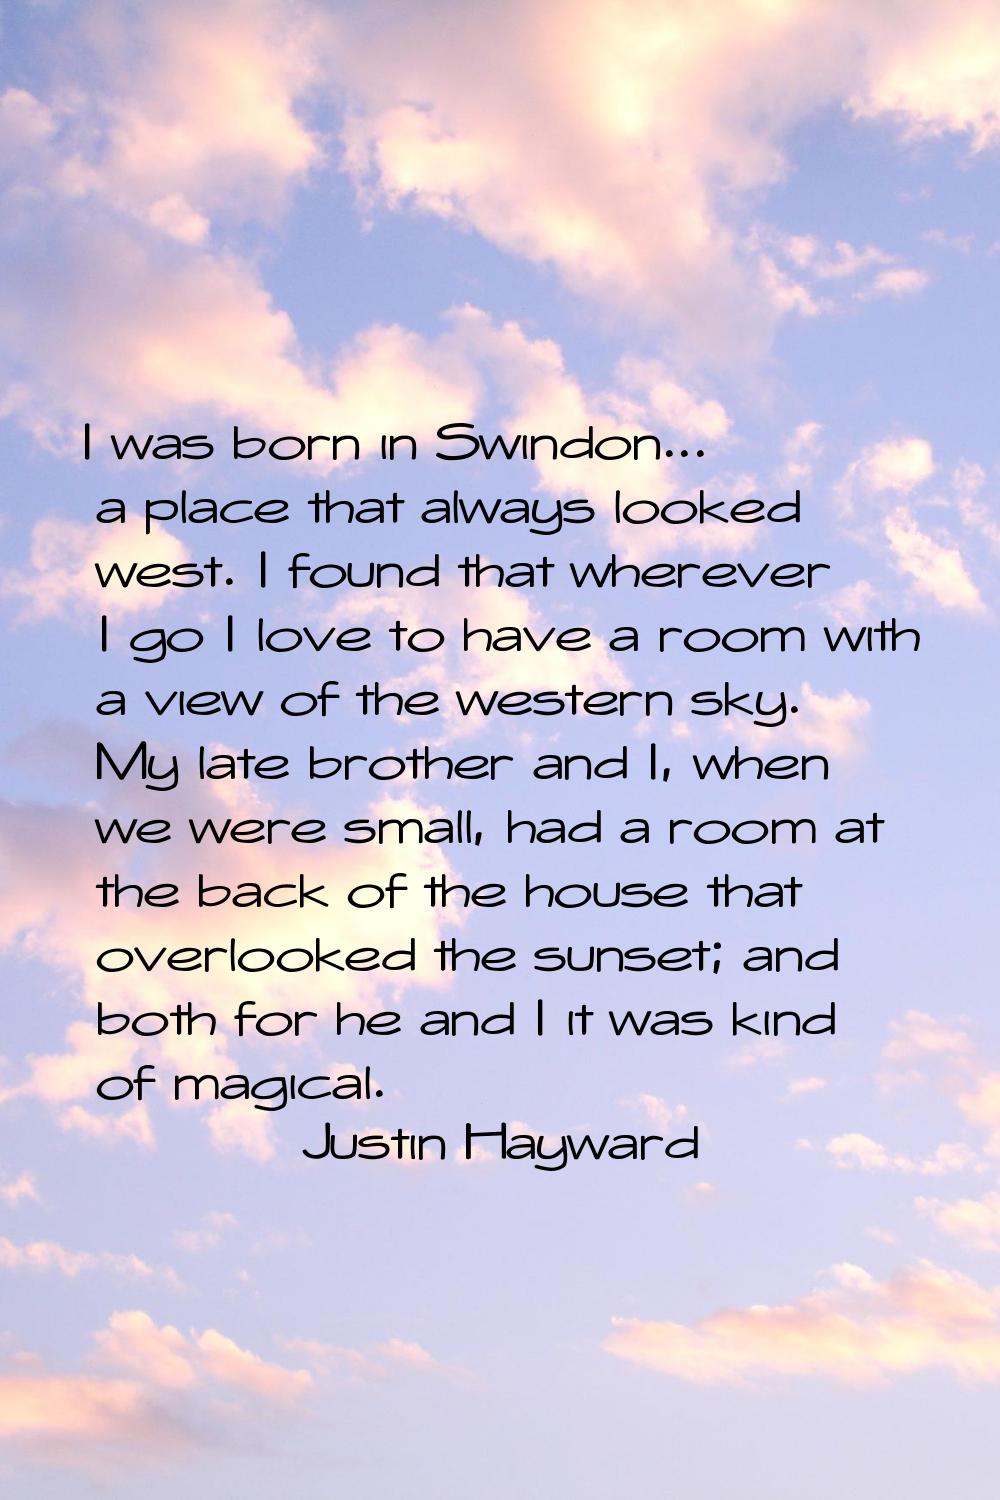 I was born in Swindon... a place that always looked west. I found that wherever I go I love to have